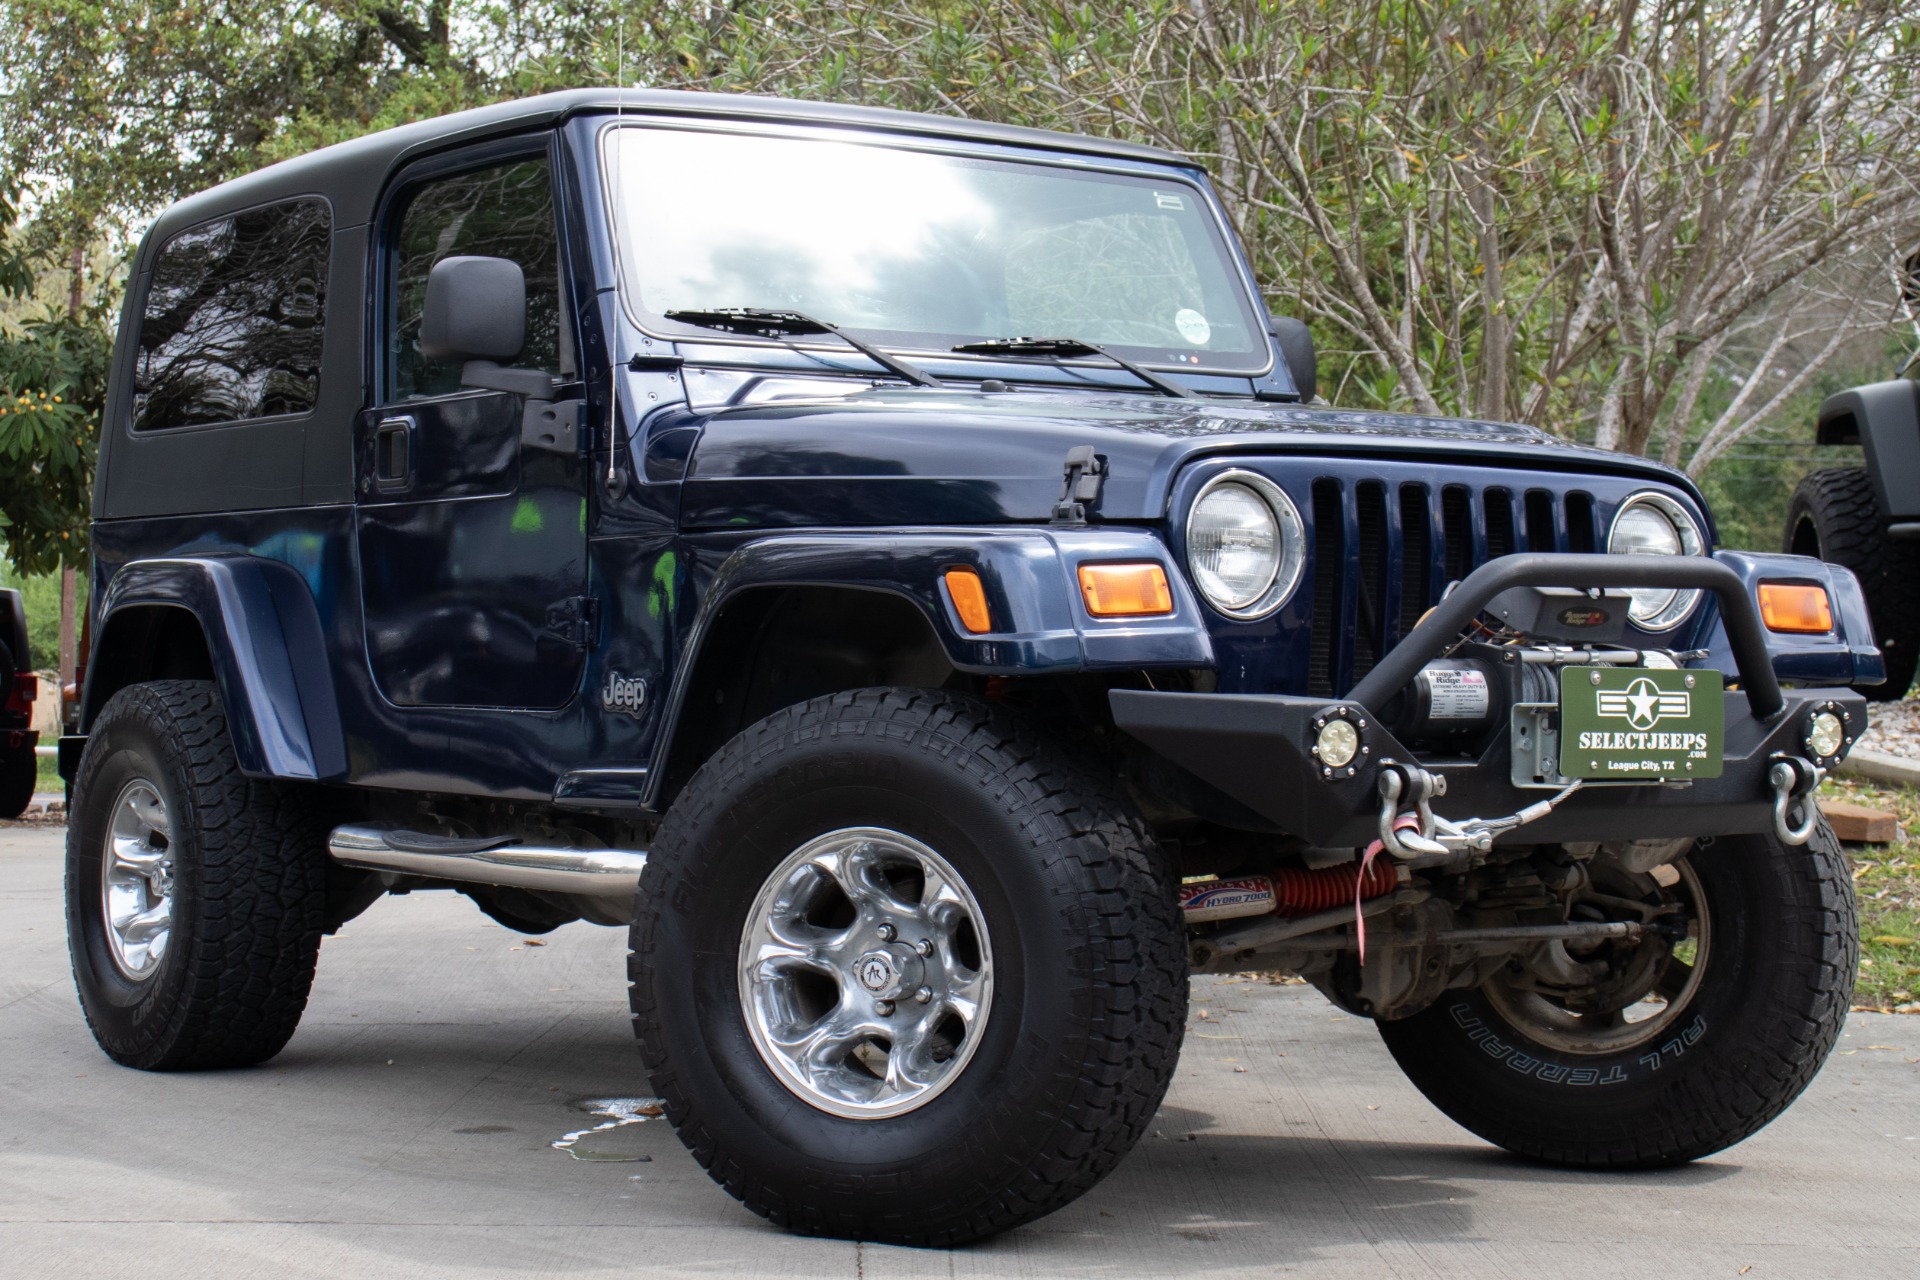 Used 2006 Jeep Wrangler Unlimited For Sale ($21,995) | Select Jeeps Inc.  Stock #706216